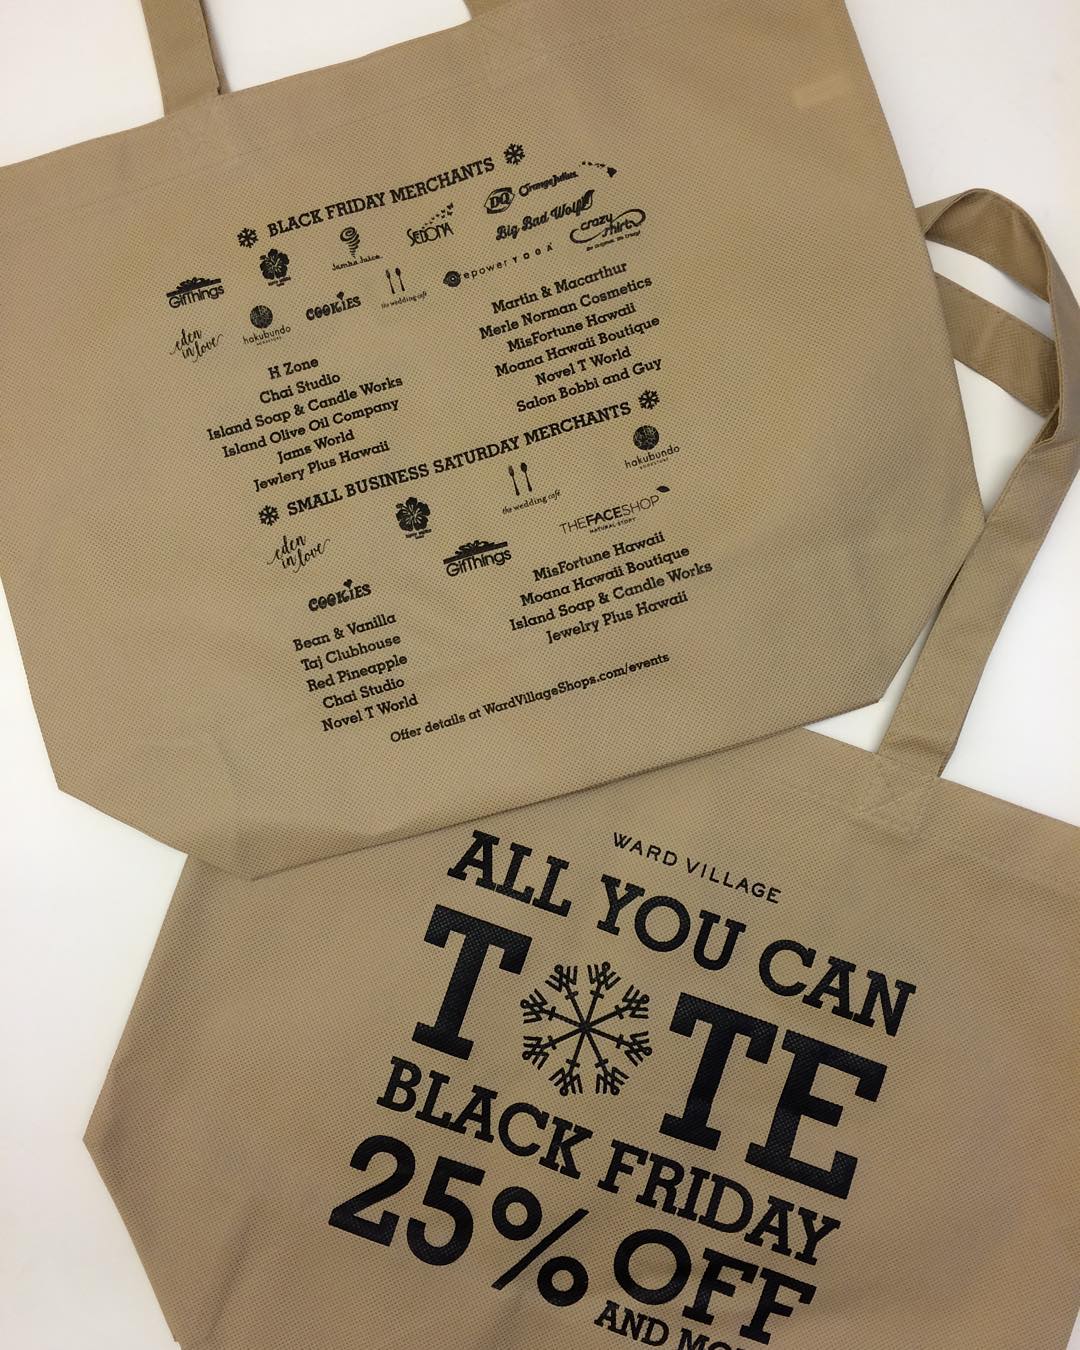 GIVEAWAY: We’re giving away 3 of our exclusive Black Friday totes! Entering is easy like this photo & tag your friends! These totes are they key to great offers on #BlackFriday & #SmallBusinessSaturday! #WeAreWard #WardVillage